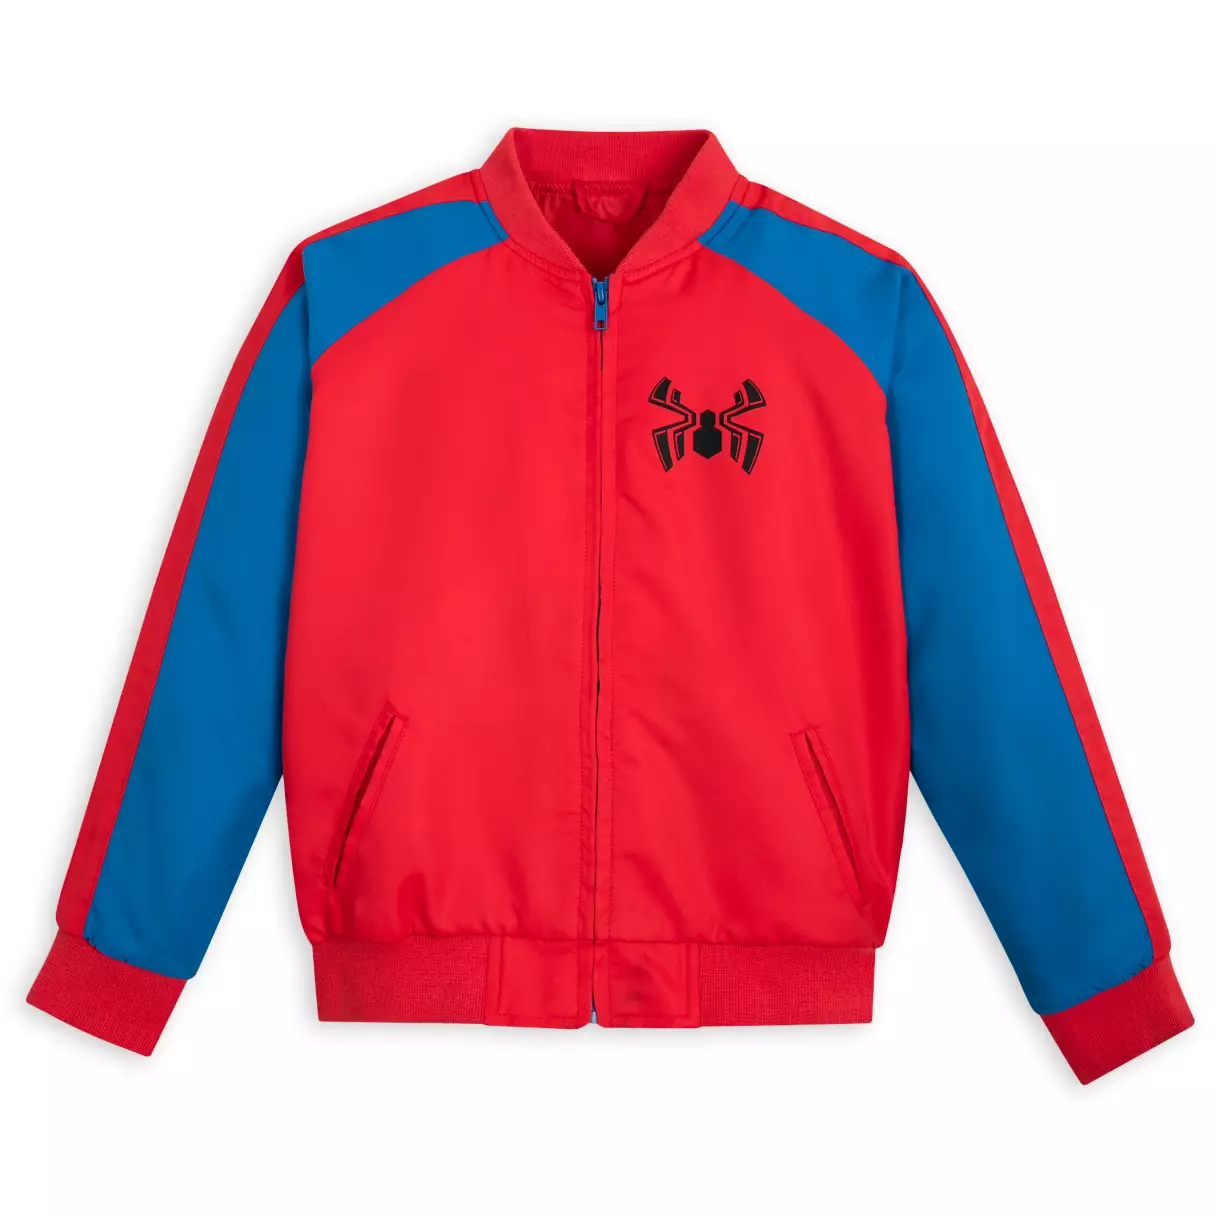 shopDisney Youth Sale: Up to 40% off Kids Clothing, Toys, and More